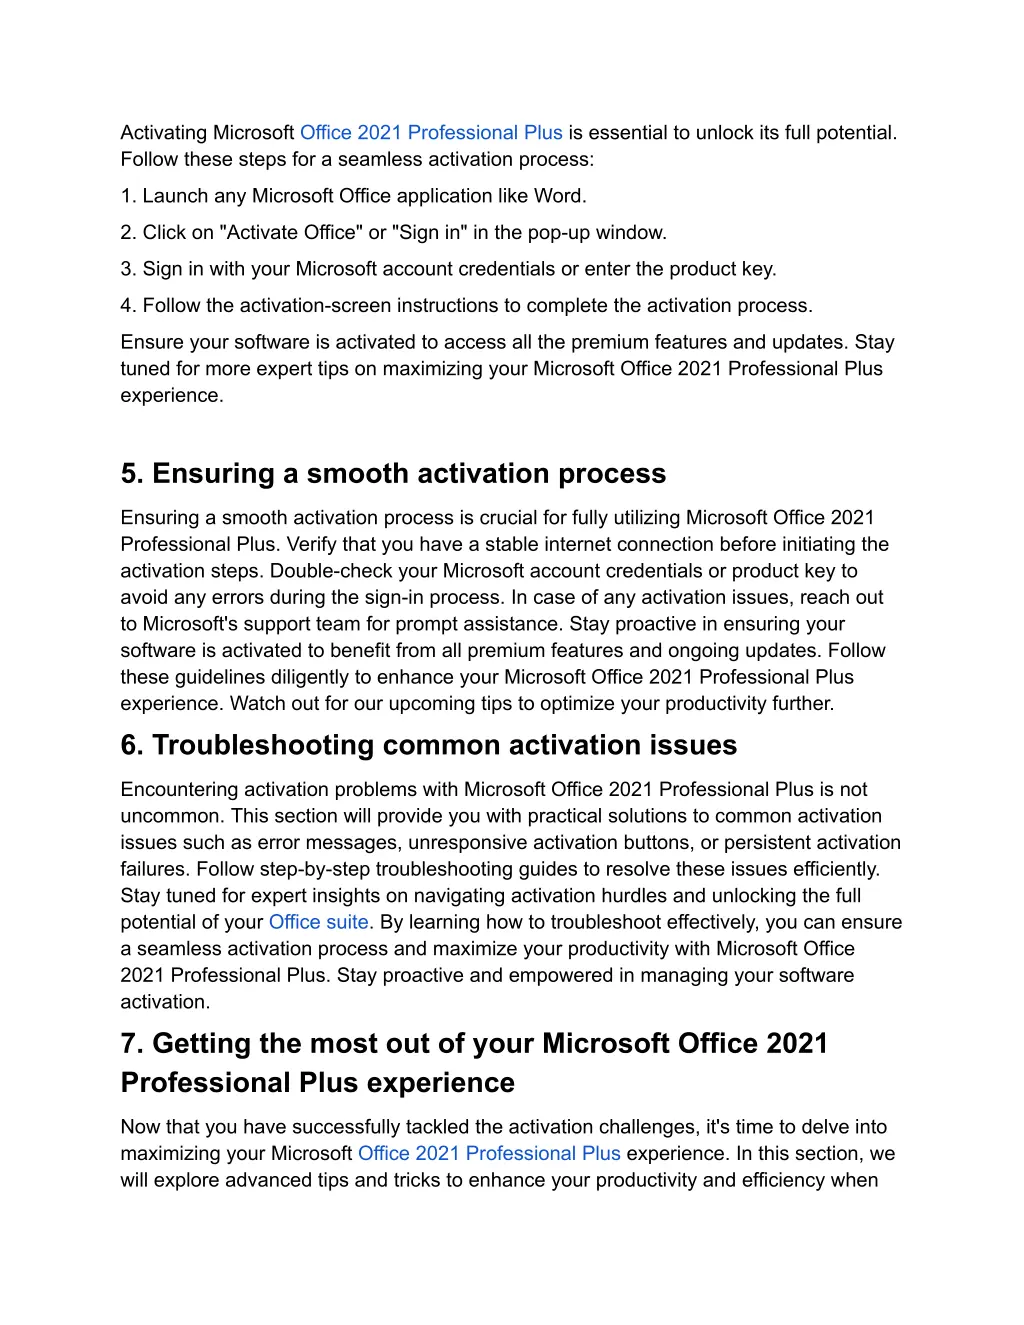 activating microsoft office 2021 professional